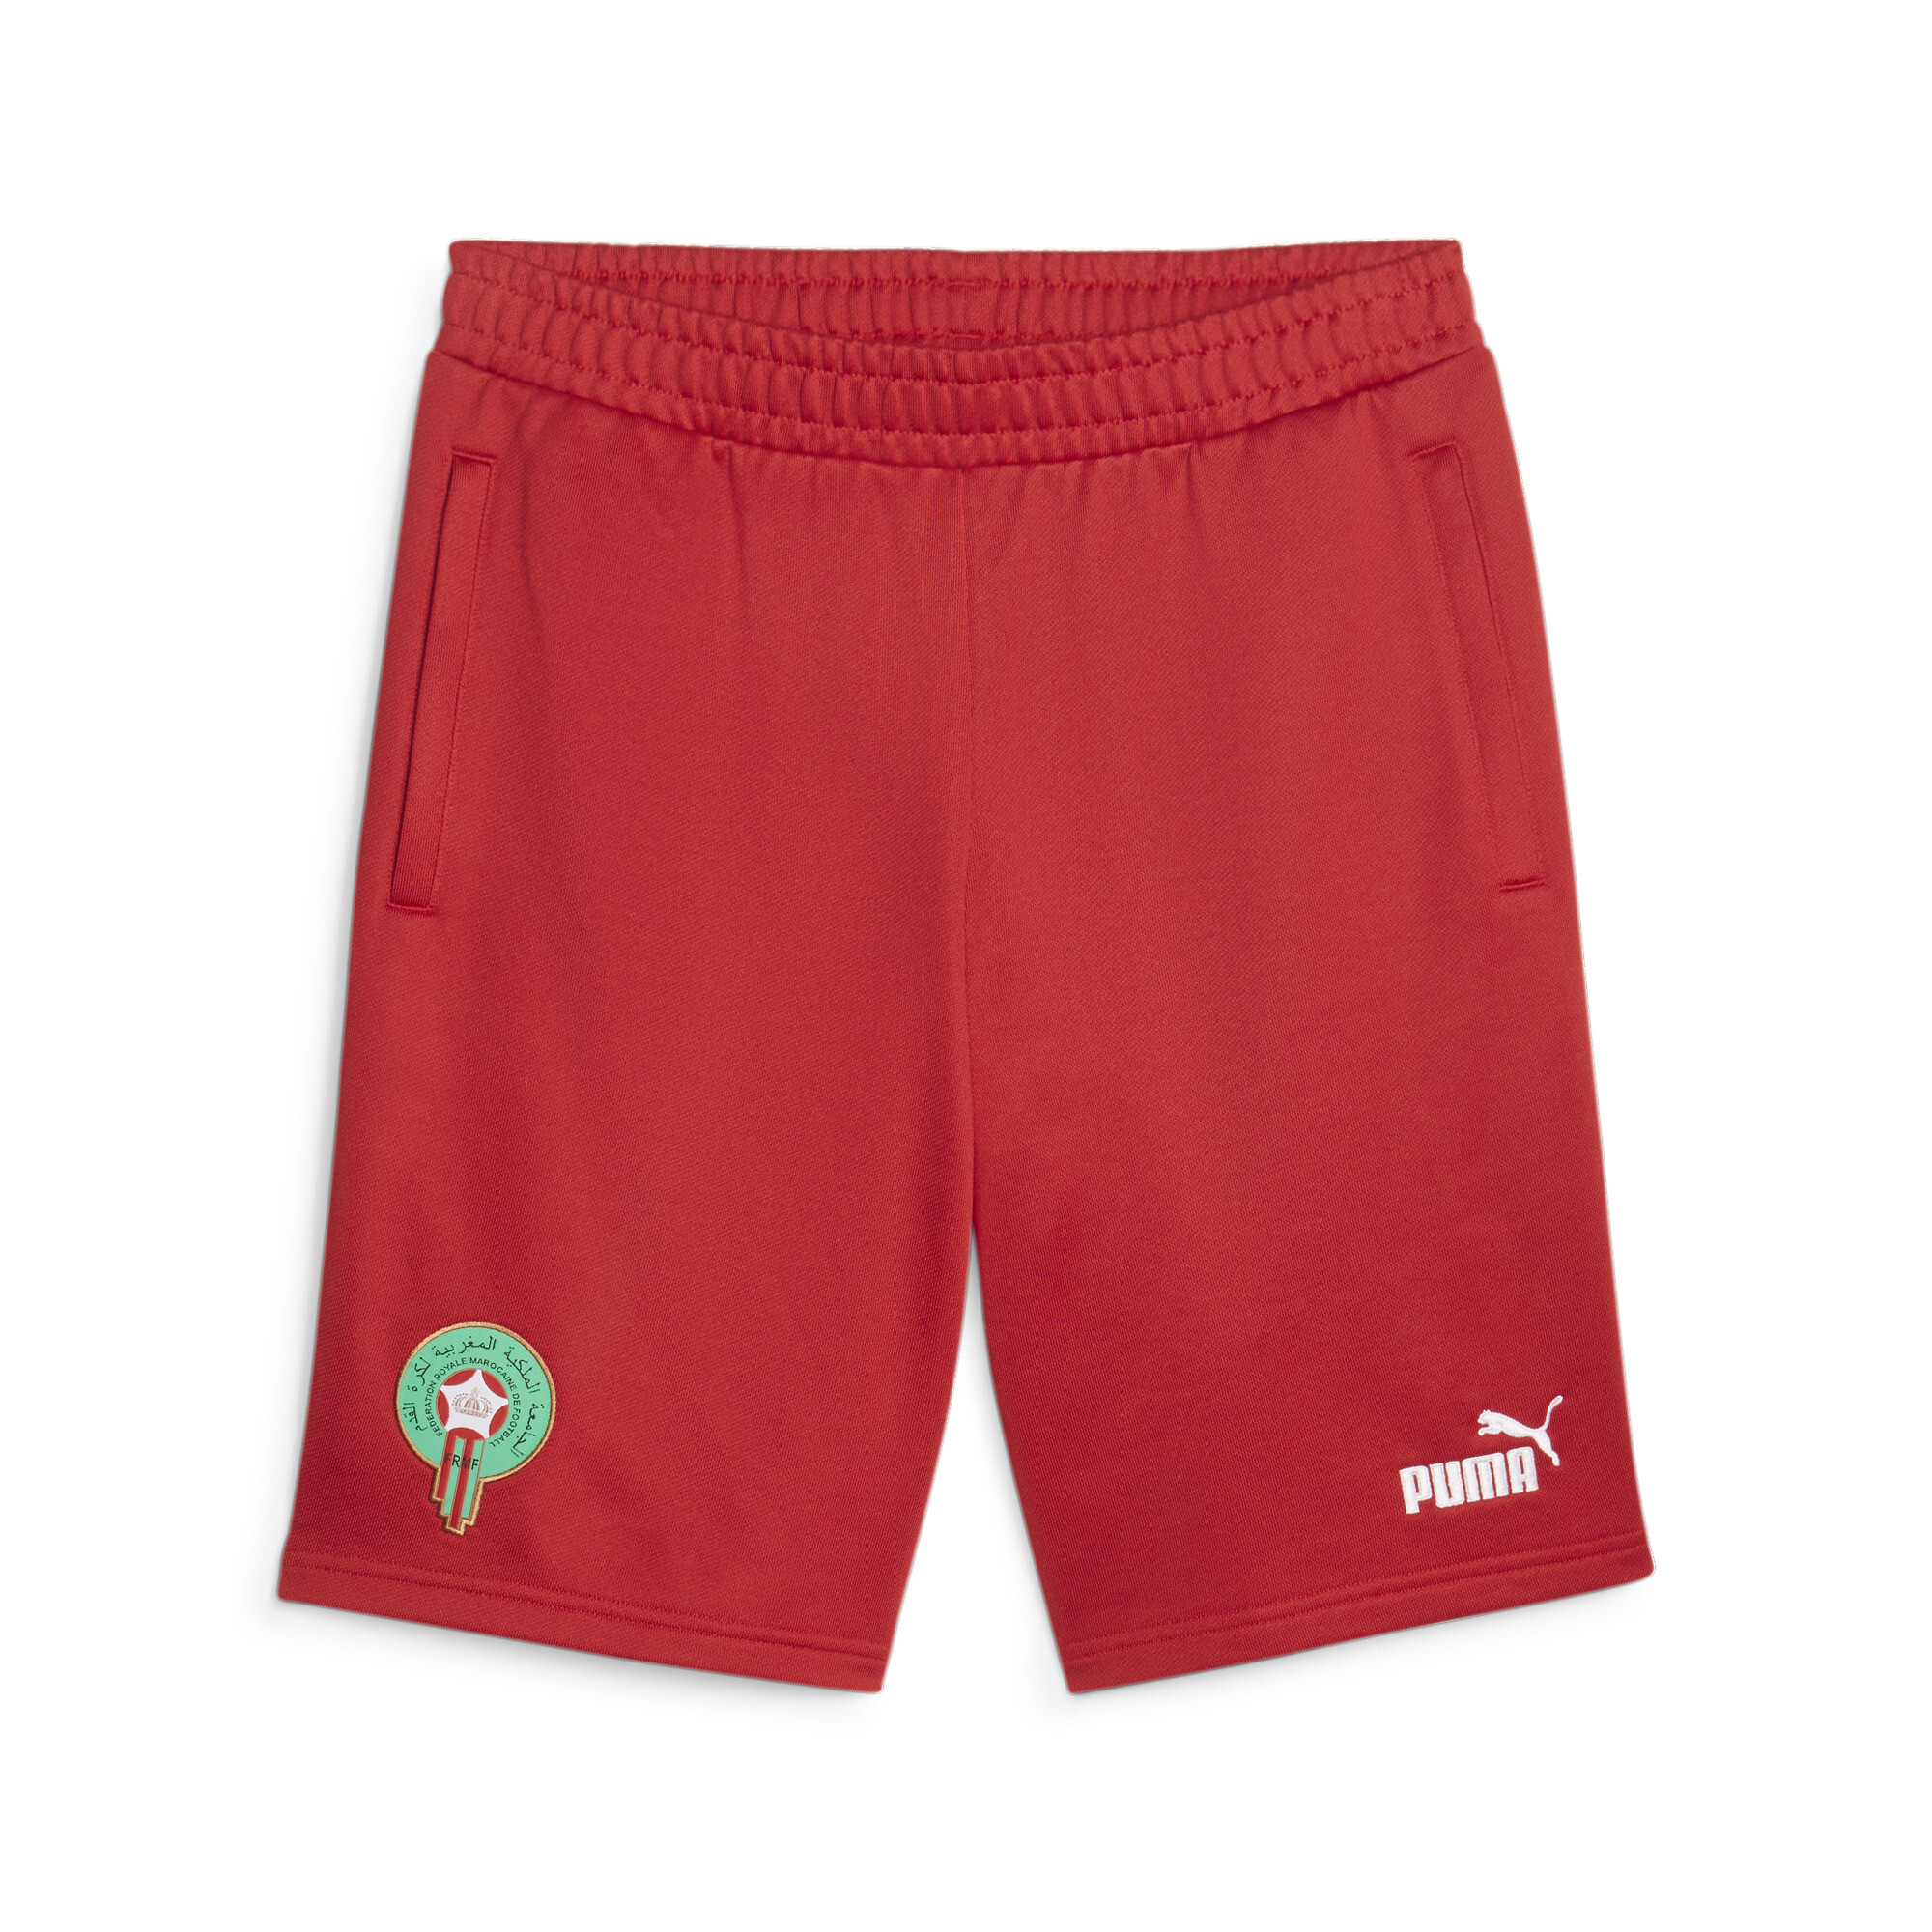 Men's Puma Morocco Ftbl Culture Shorts, Red, Size L, Clothing